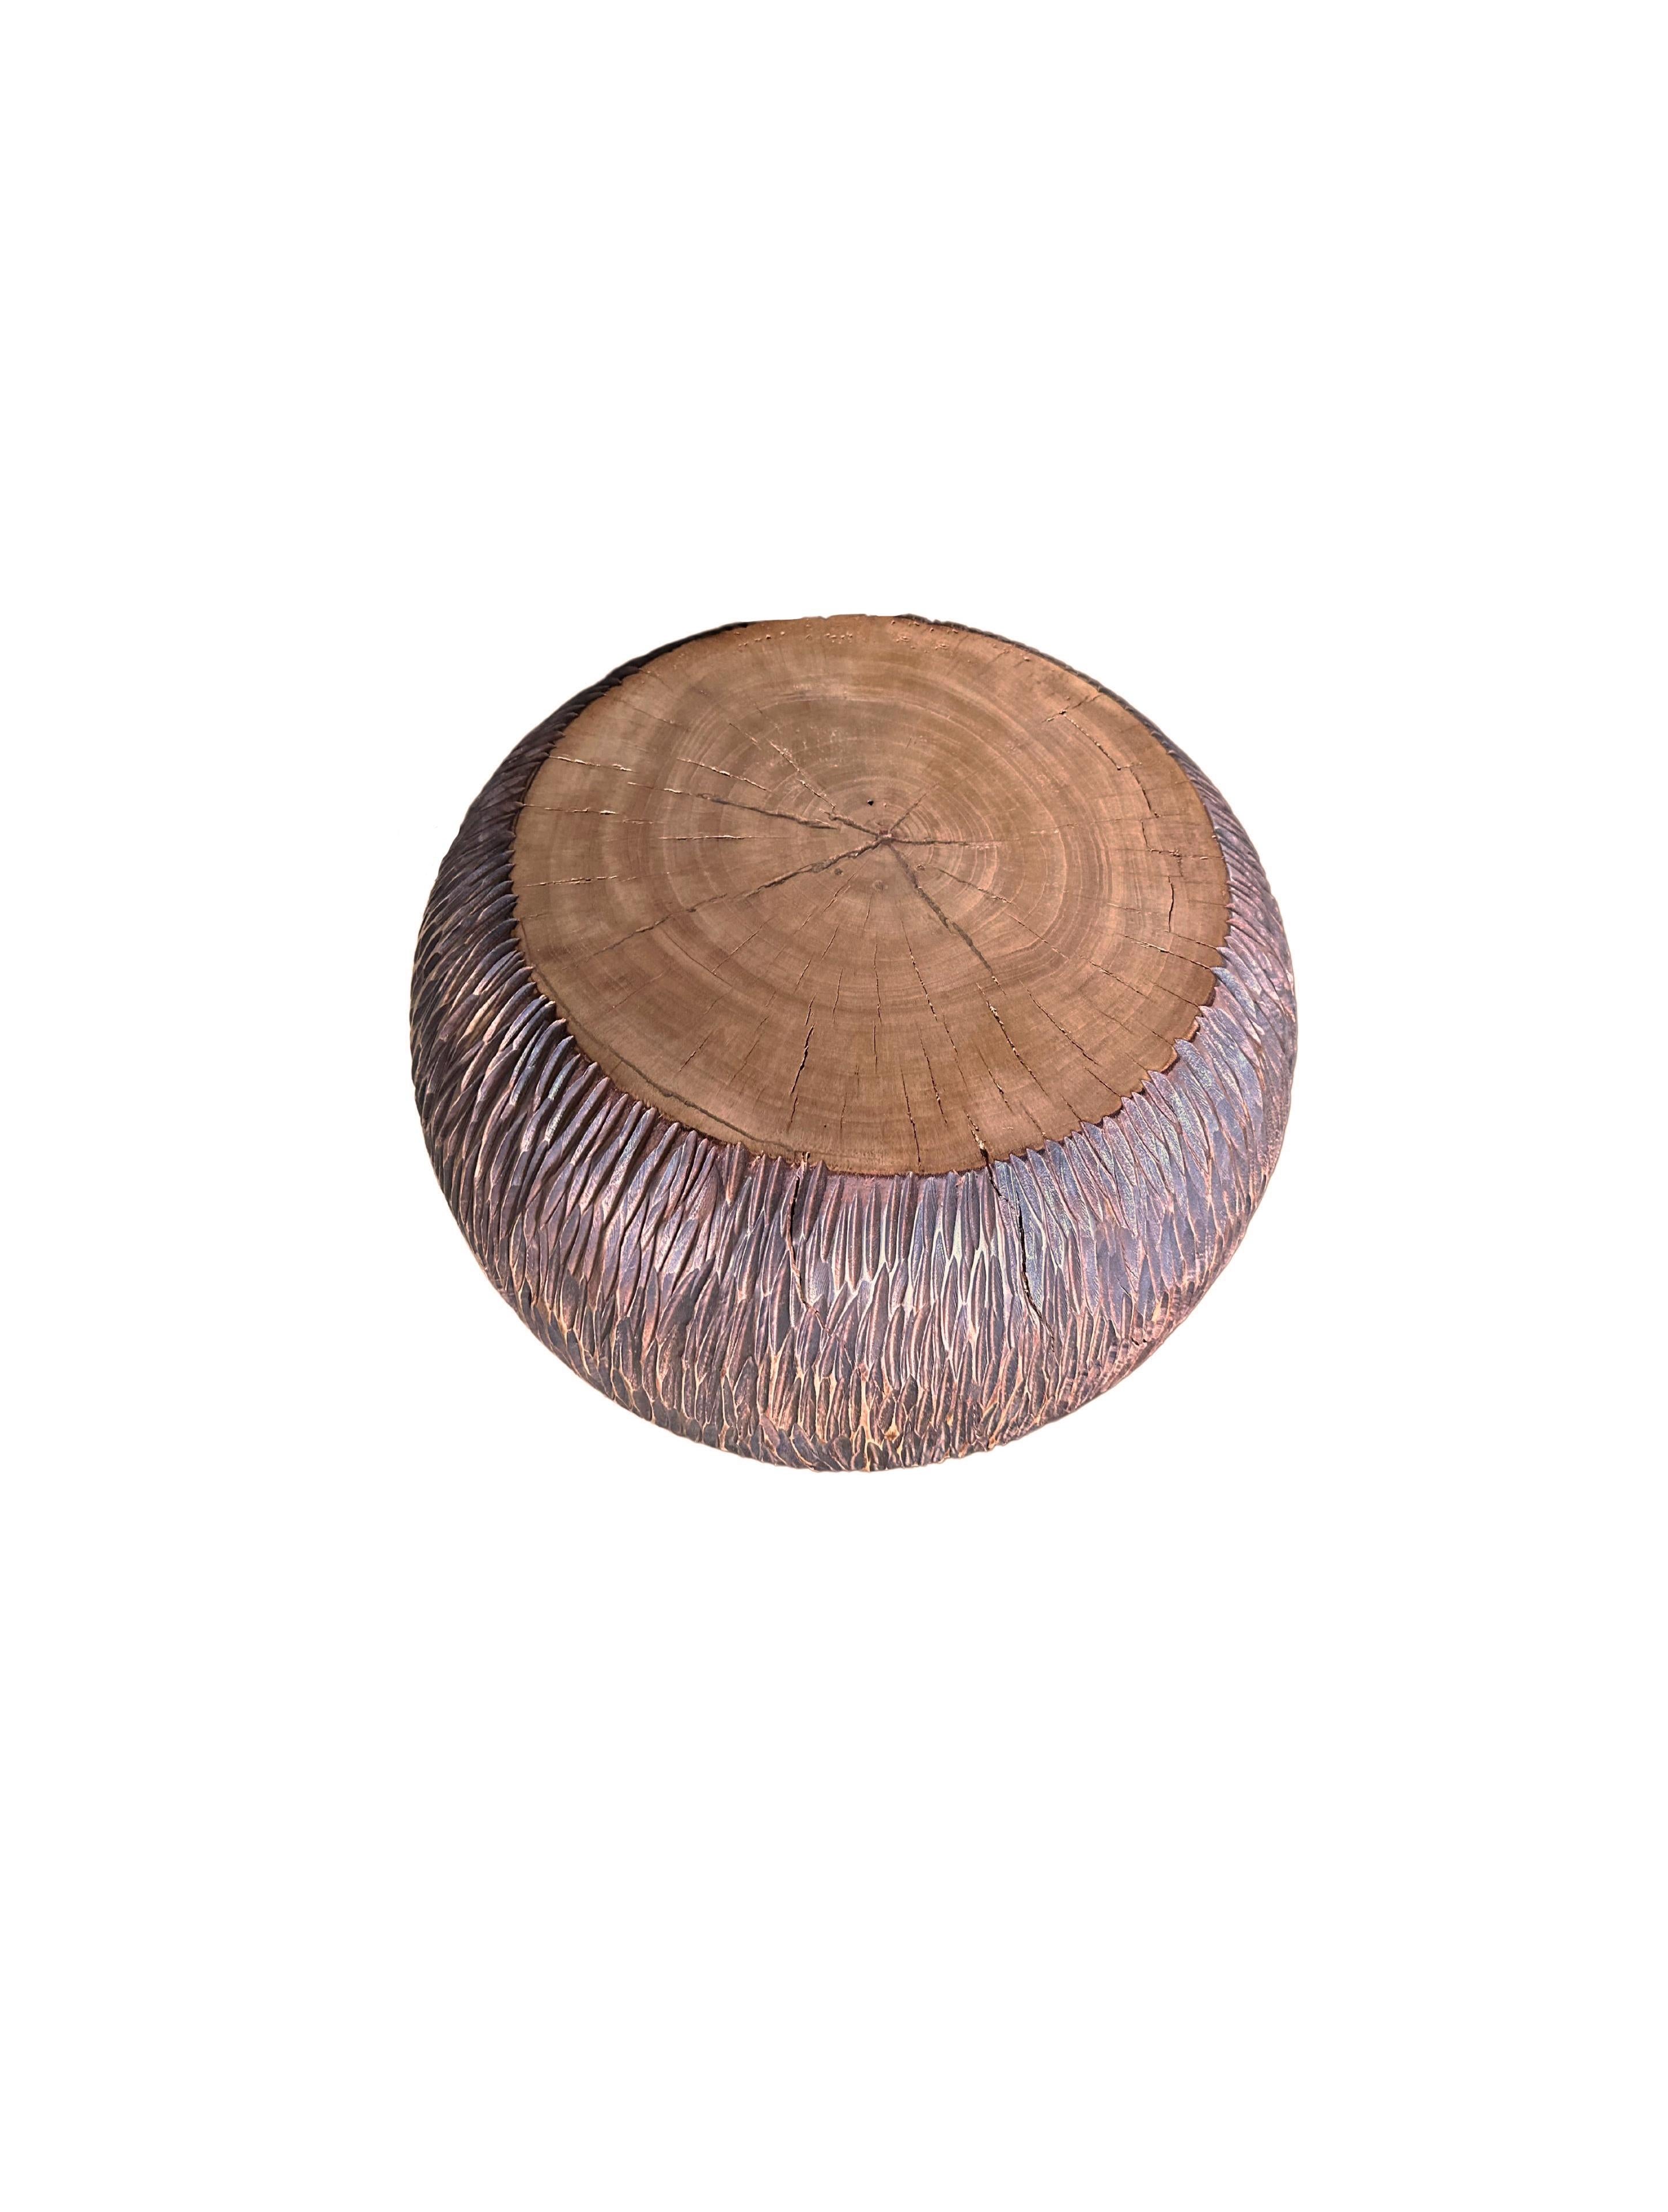 Hand-Crafted Sculptural Side Table Solid Mango Wood, Hand-Hewn Detailing, Modern Organic For Sale